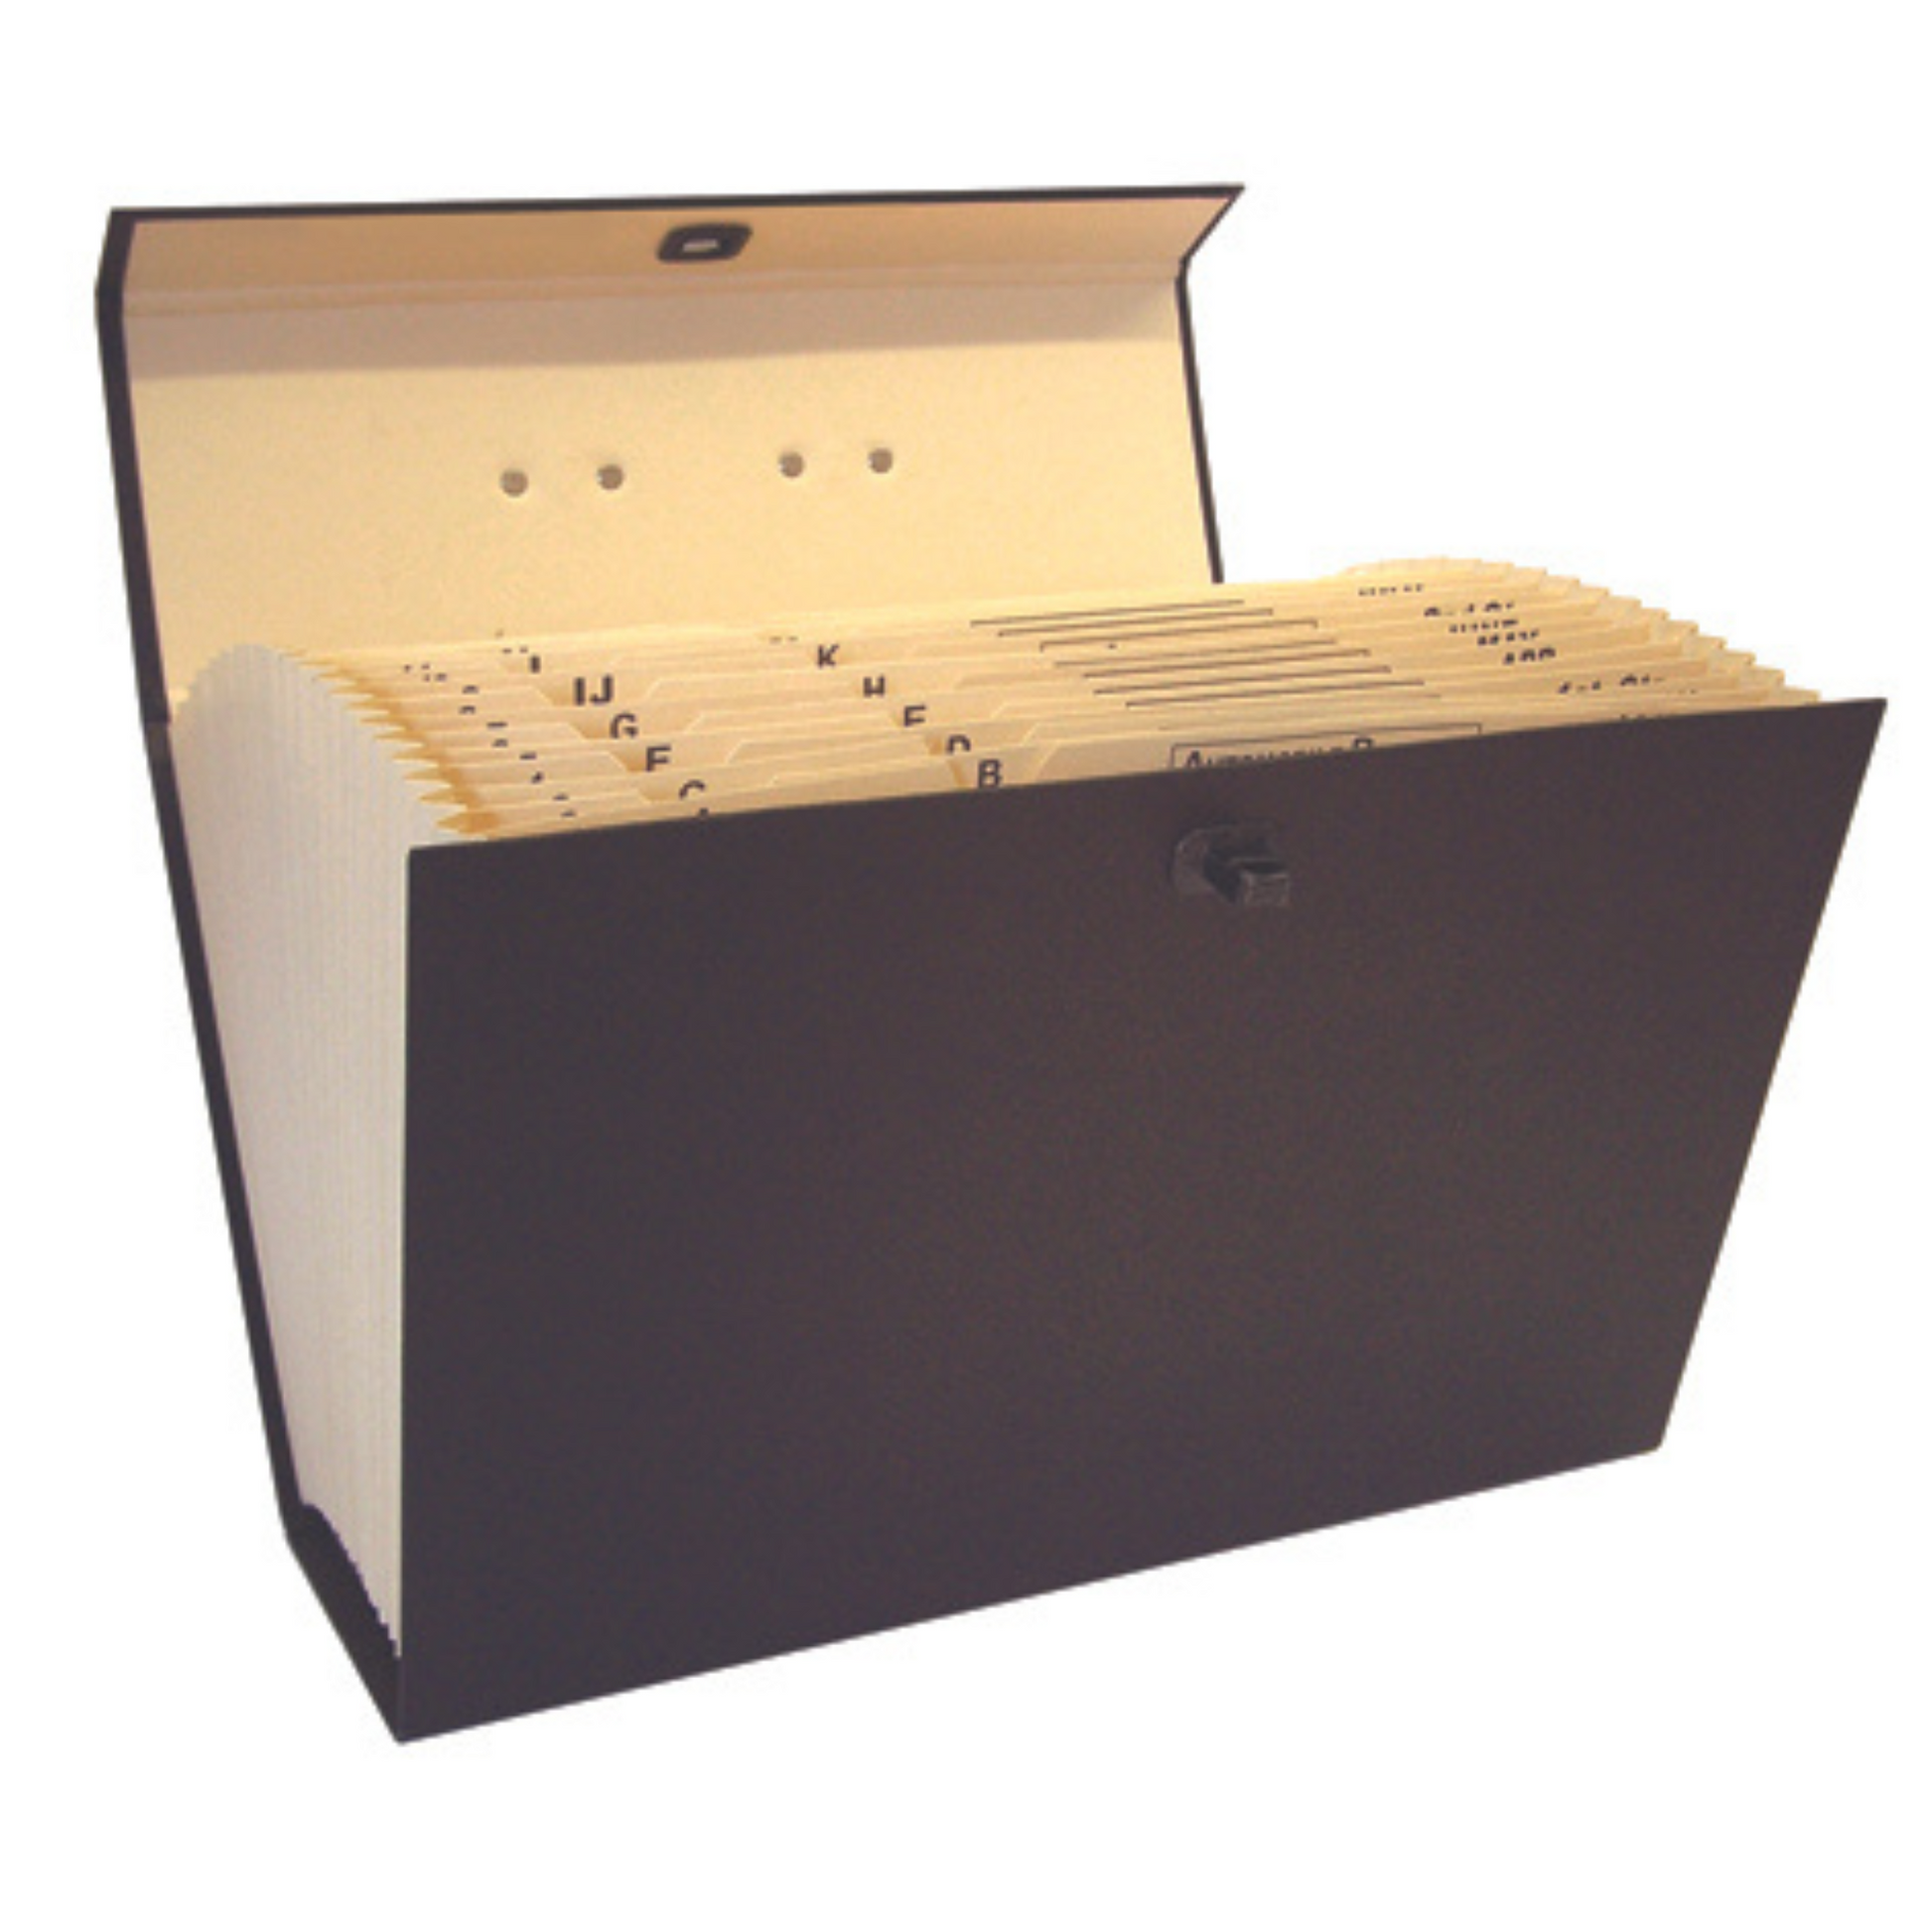 The image shows a black box-style expanding file organizer with open lid. Inside, there are multiple tabbed dividers with alphabet letters indicating sections from A to Z. The tabs are beige manila with black printed letters, and the box seems to be designed for organizing and storing documents in a home or office setting. 